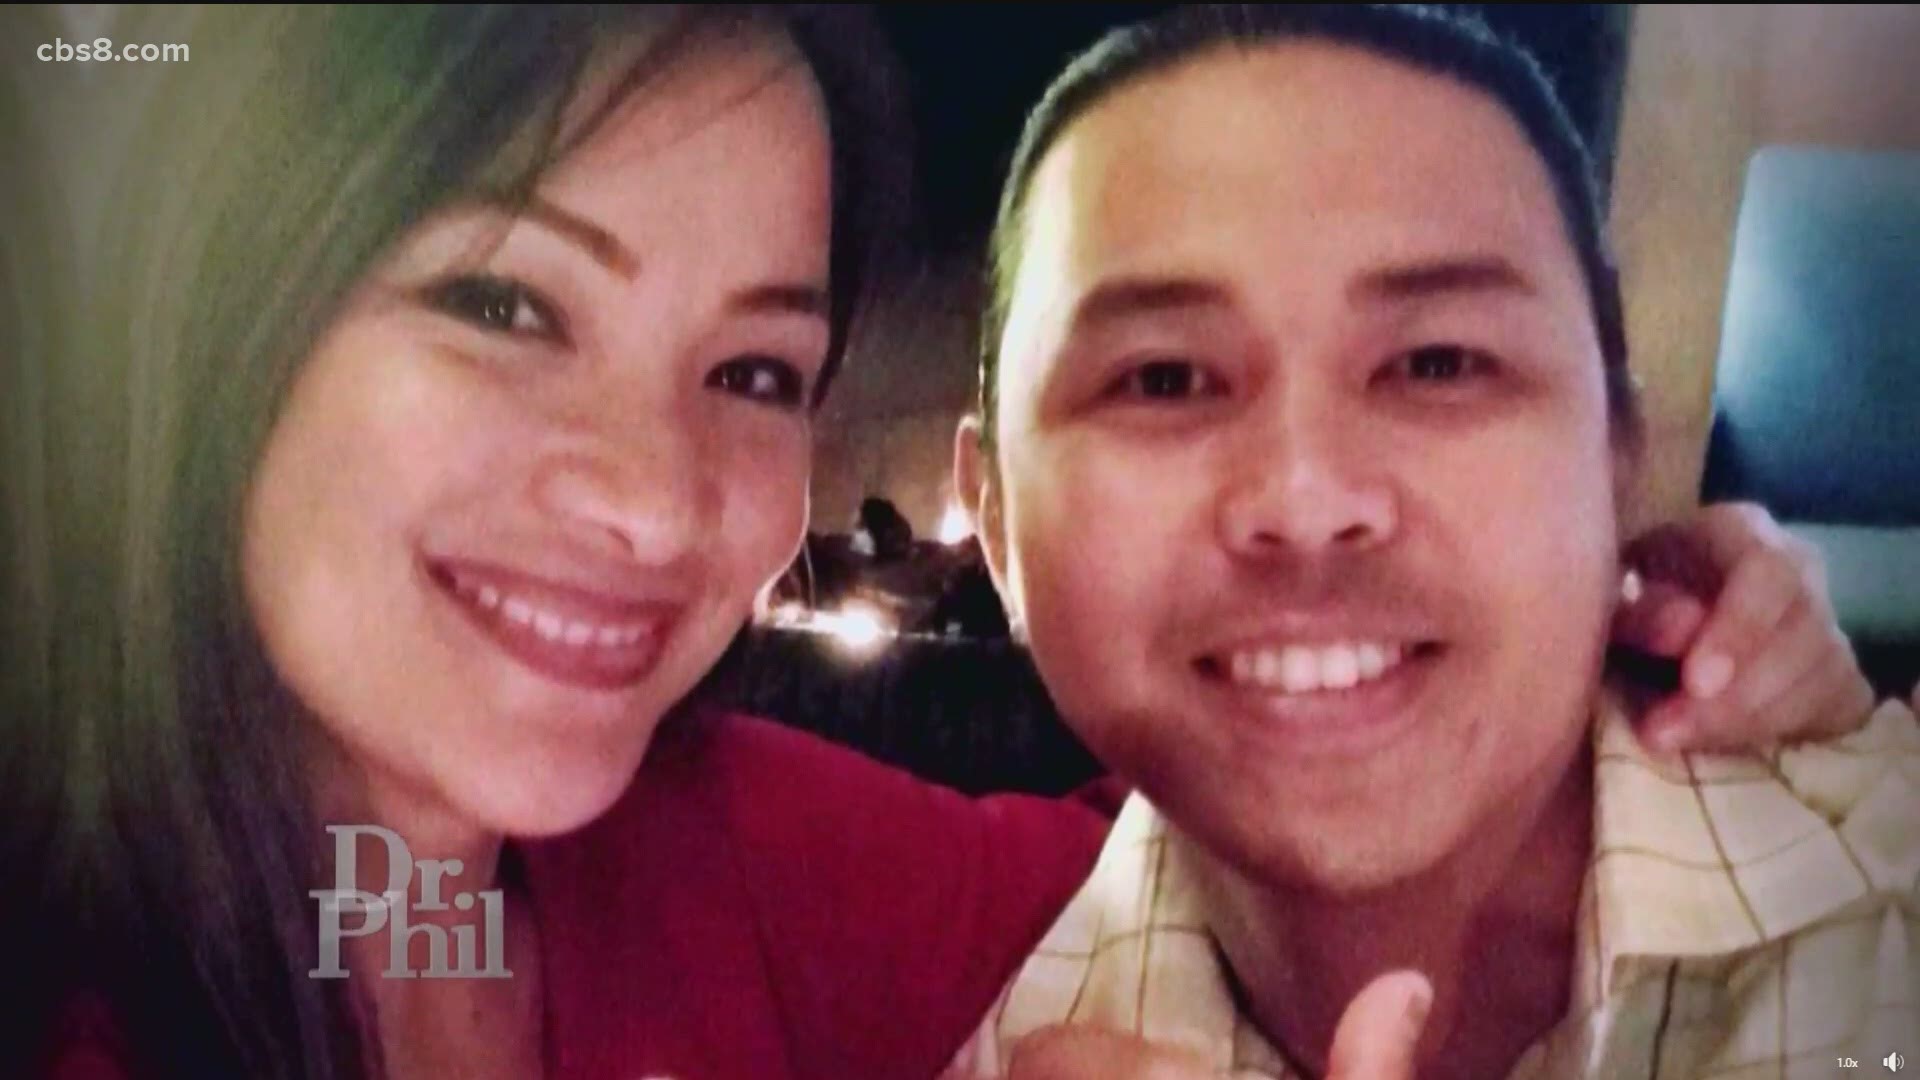 Sister and brother-in-law revealed new details in the Maya Millete case.